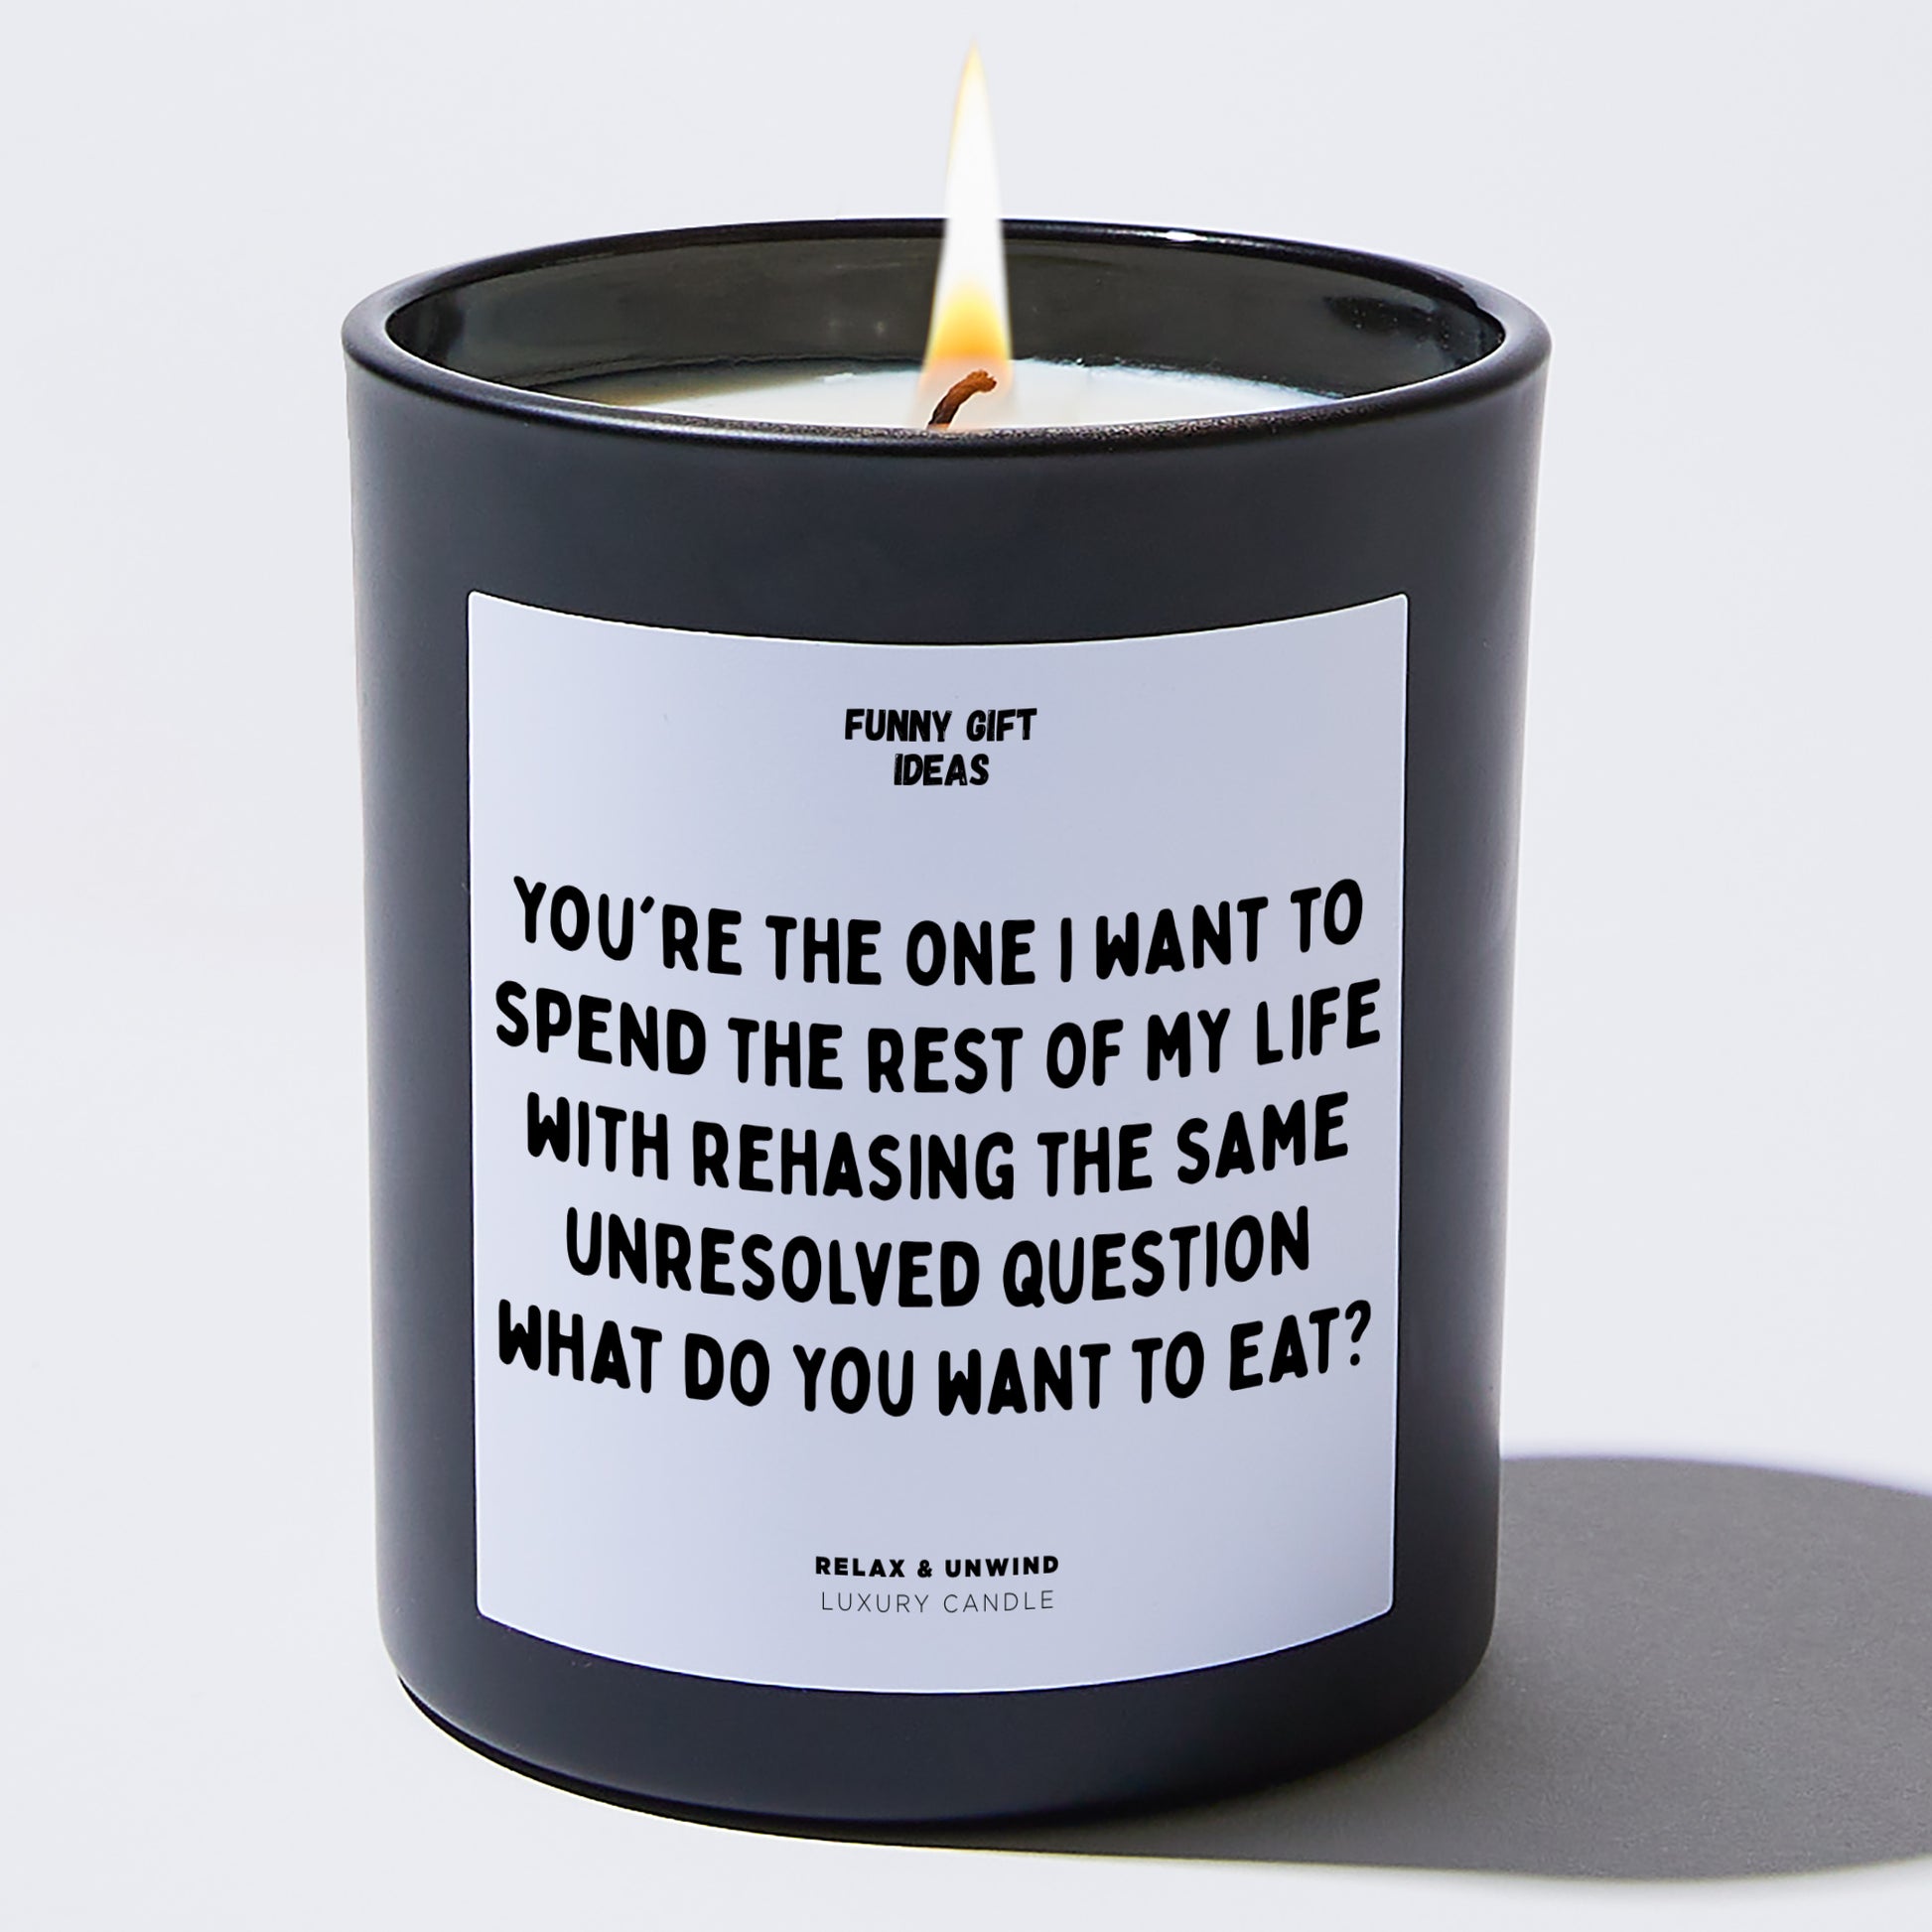 Anniversary You're the One I Want to Spend the Rest of My Life With Rehasing the Same Unresolved Question. What Do You Want to Eat? - Funny Gift Ideas